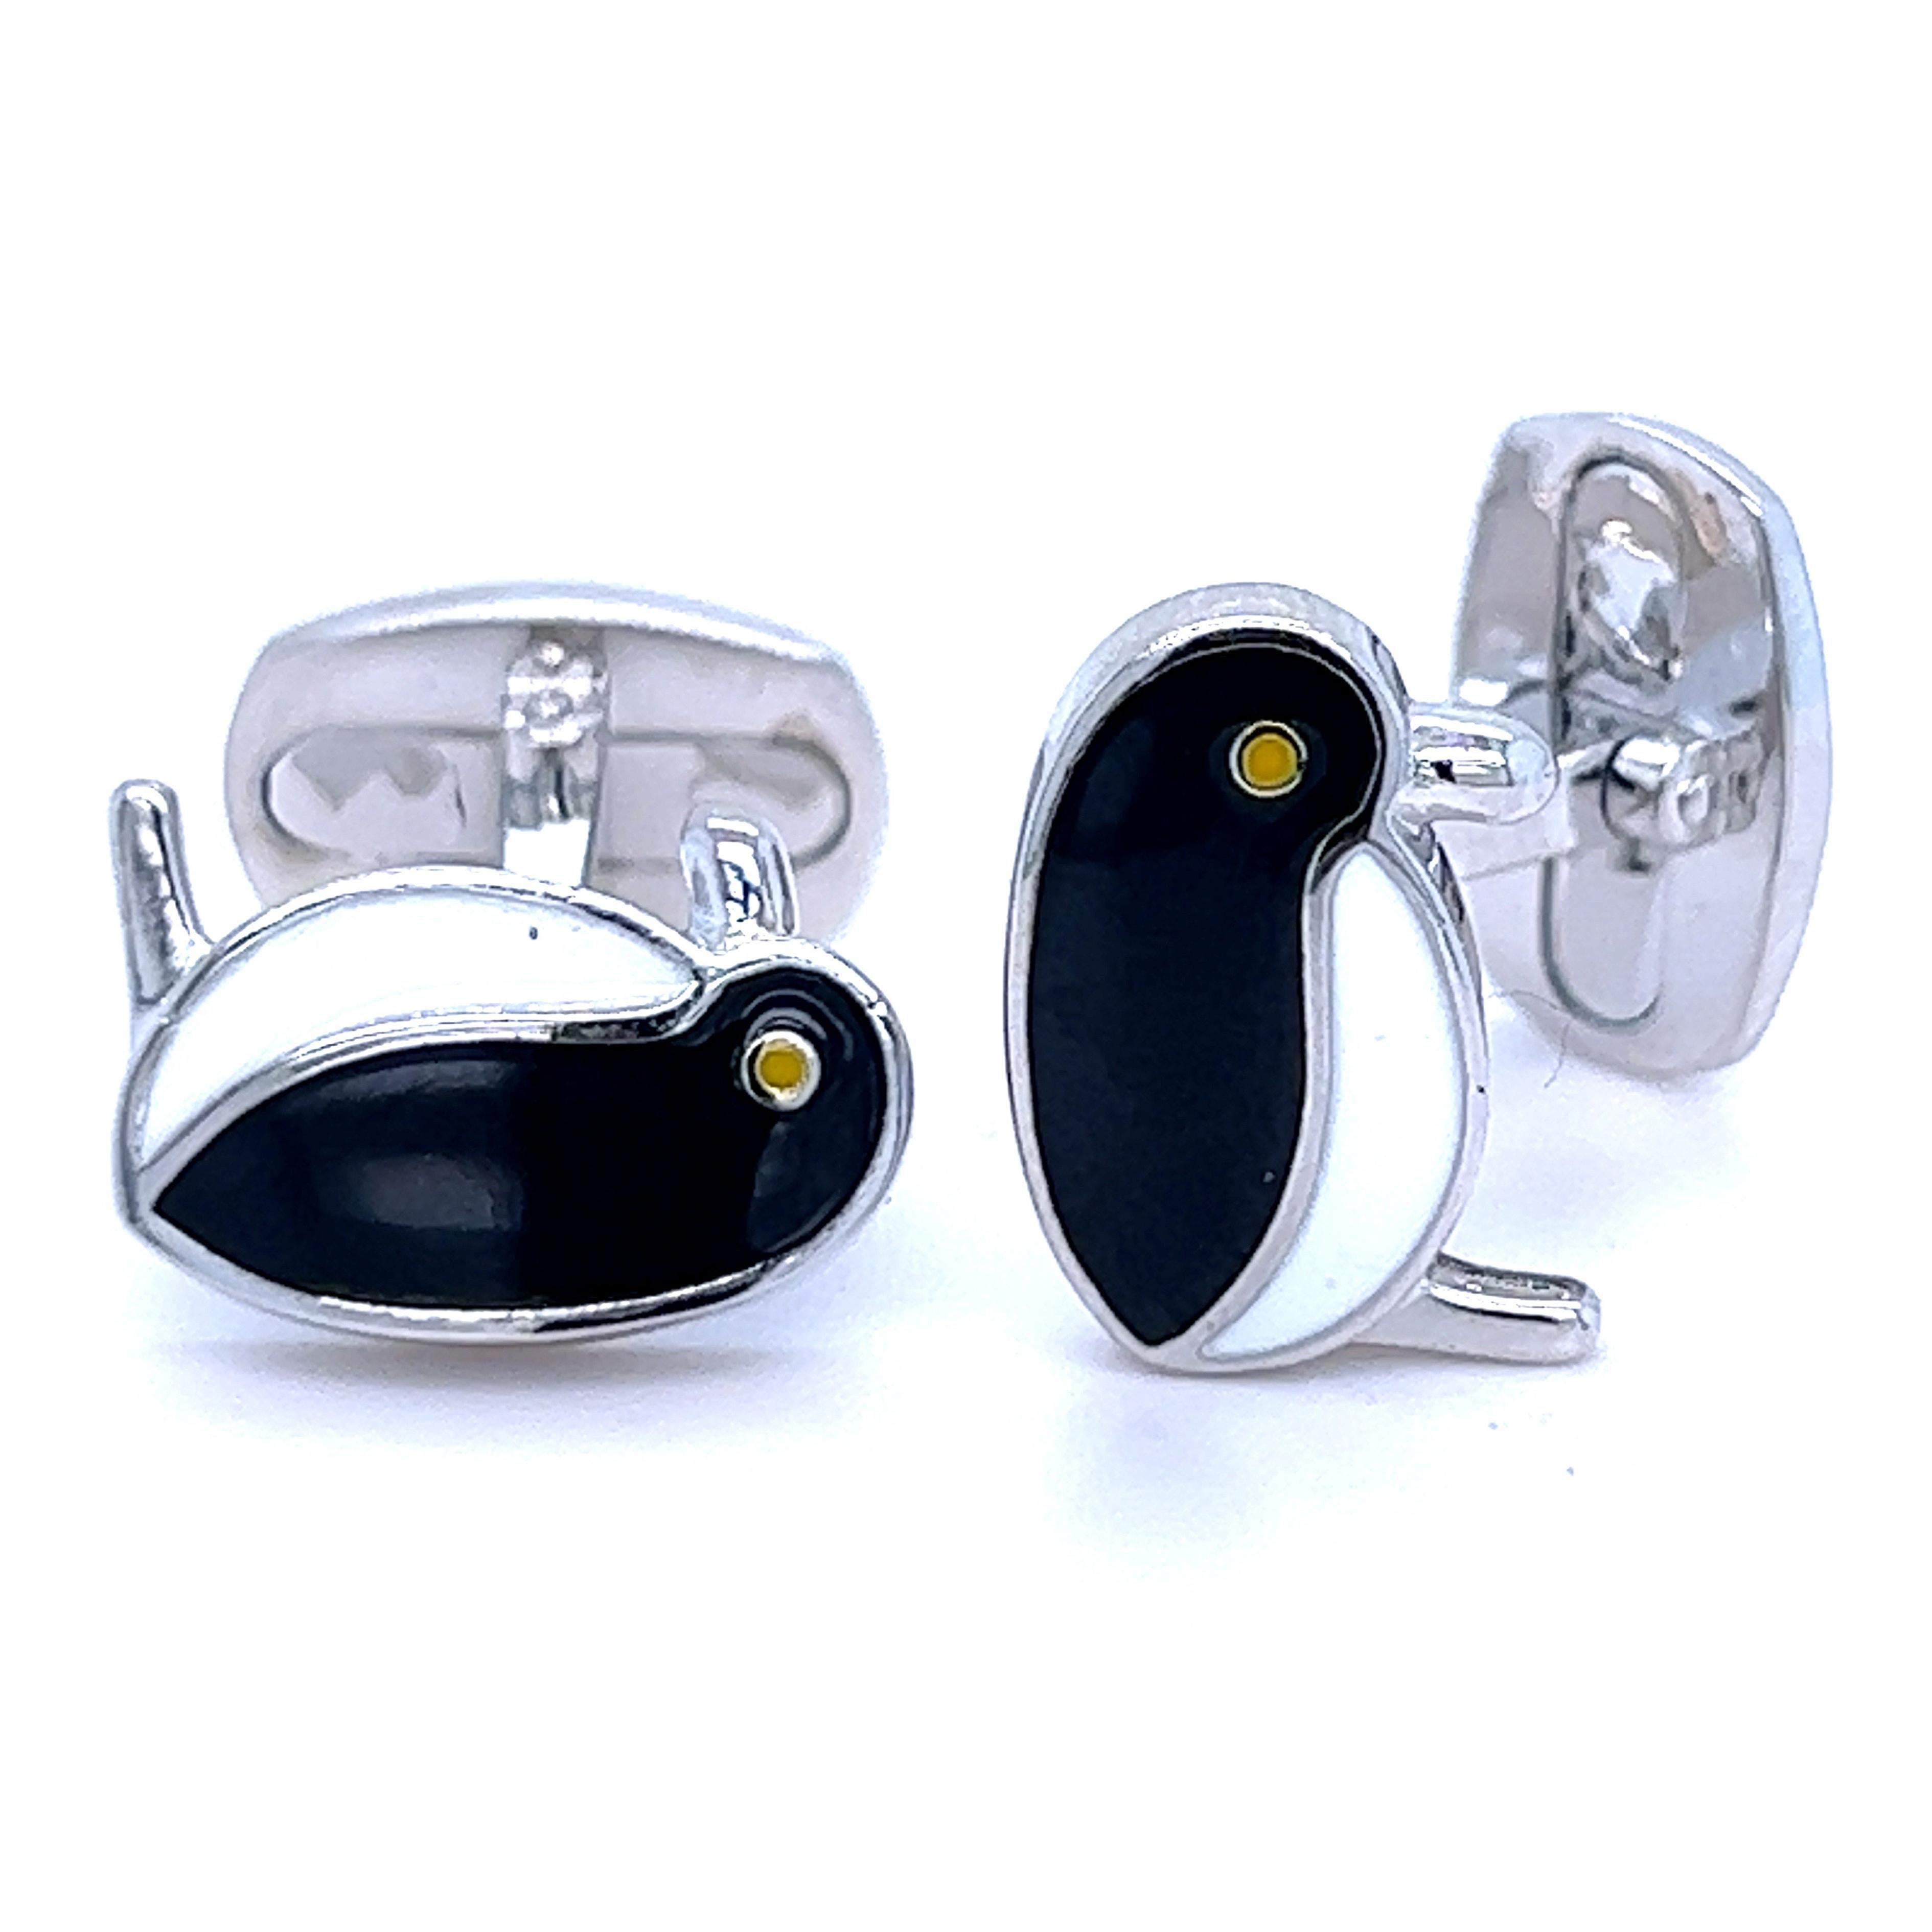 Chic, Unique yet Timeless, Black and White Hand Enamelled Little Penguin Shaped T-Bar Back, Sterling Silver Cufflinks.
In our smart suede tobacco leather case and pouch.
